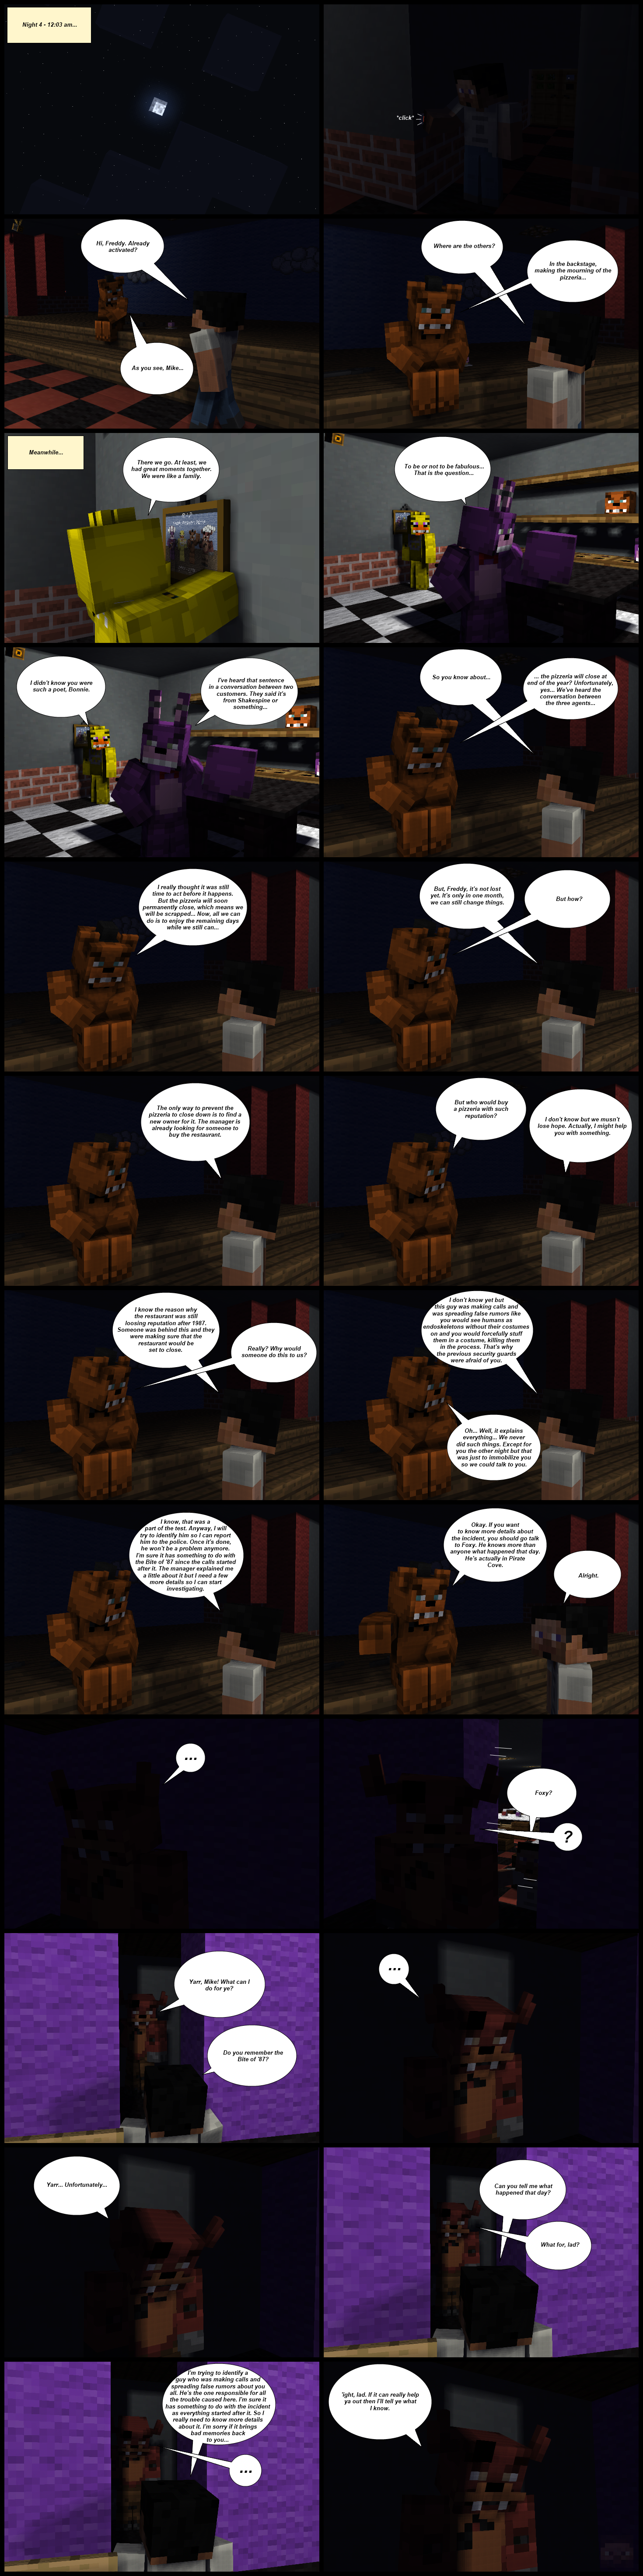 fnaf___page_12_by_fighter33000-d8dn0w1.p